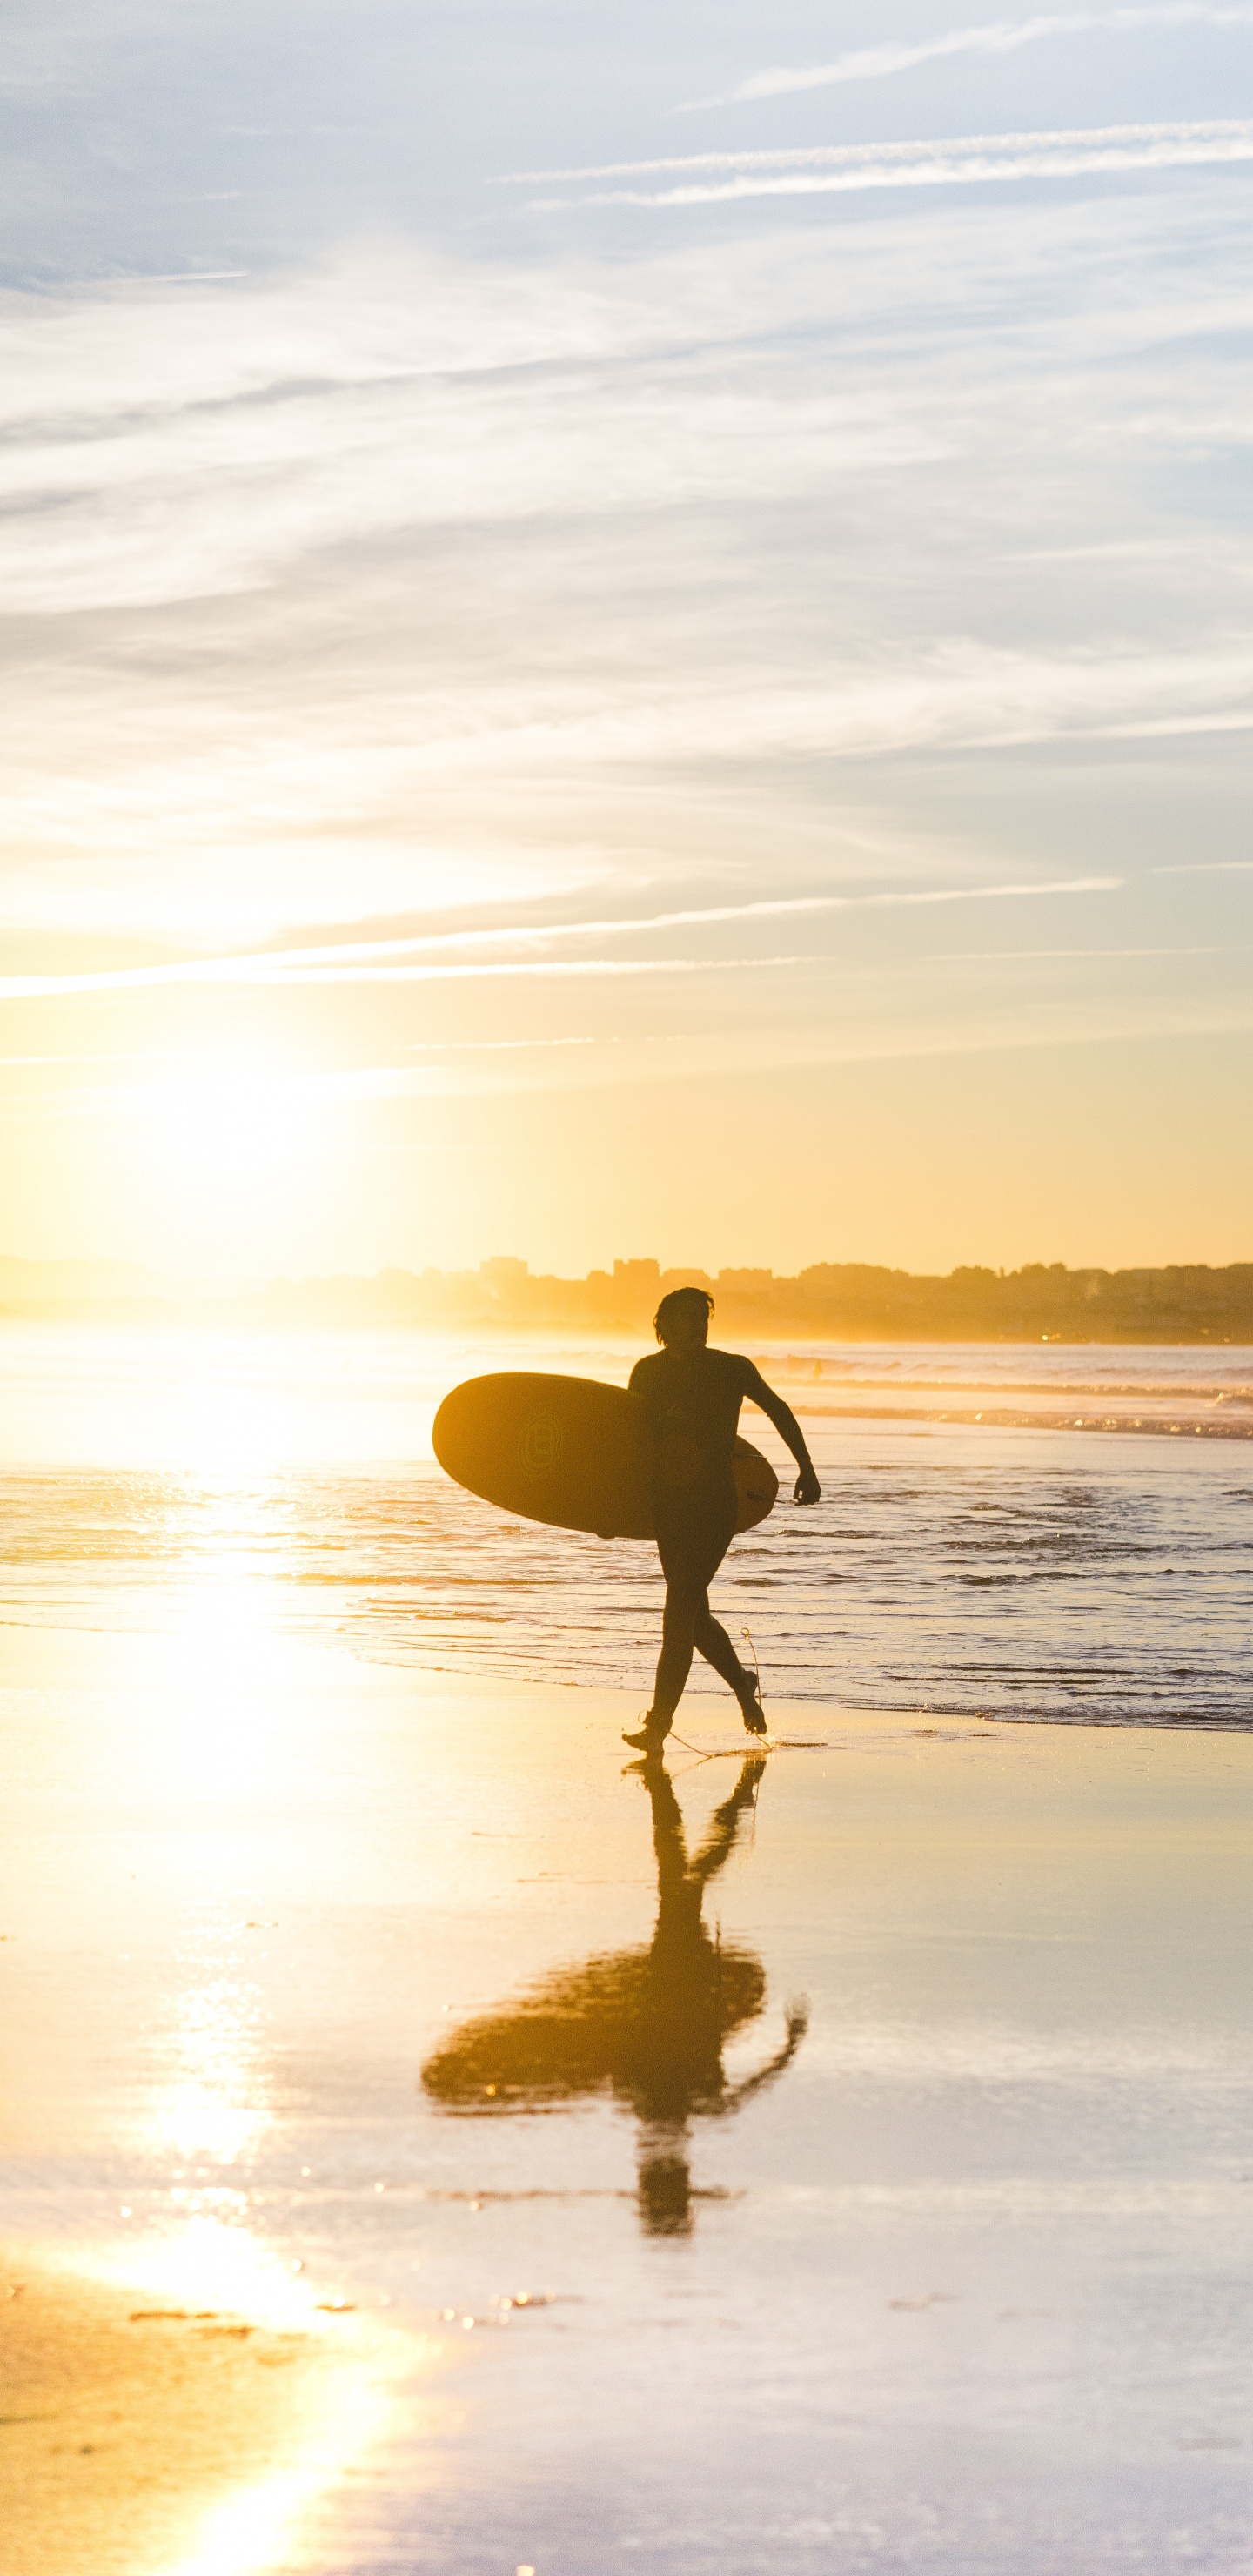 Man in Black Shorts Holding Surfboard Walking on Seashore During Sunset. Wallpaper in 1440x2960 Resolution